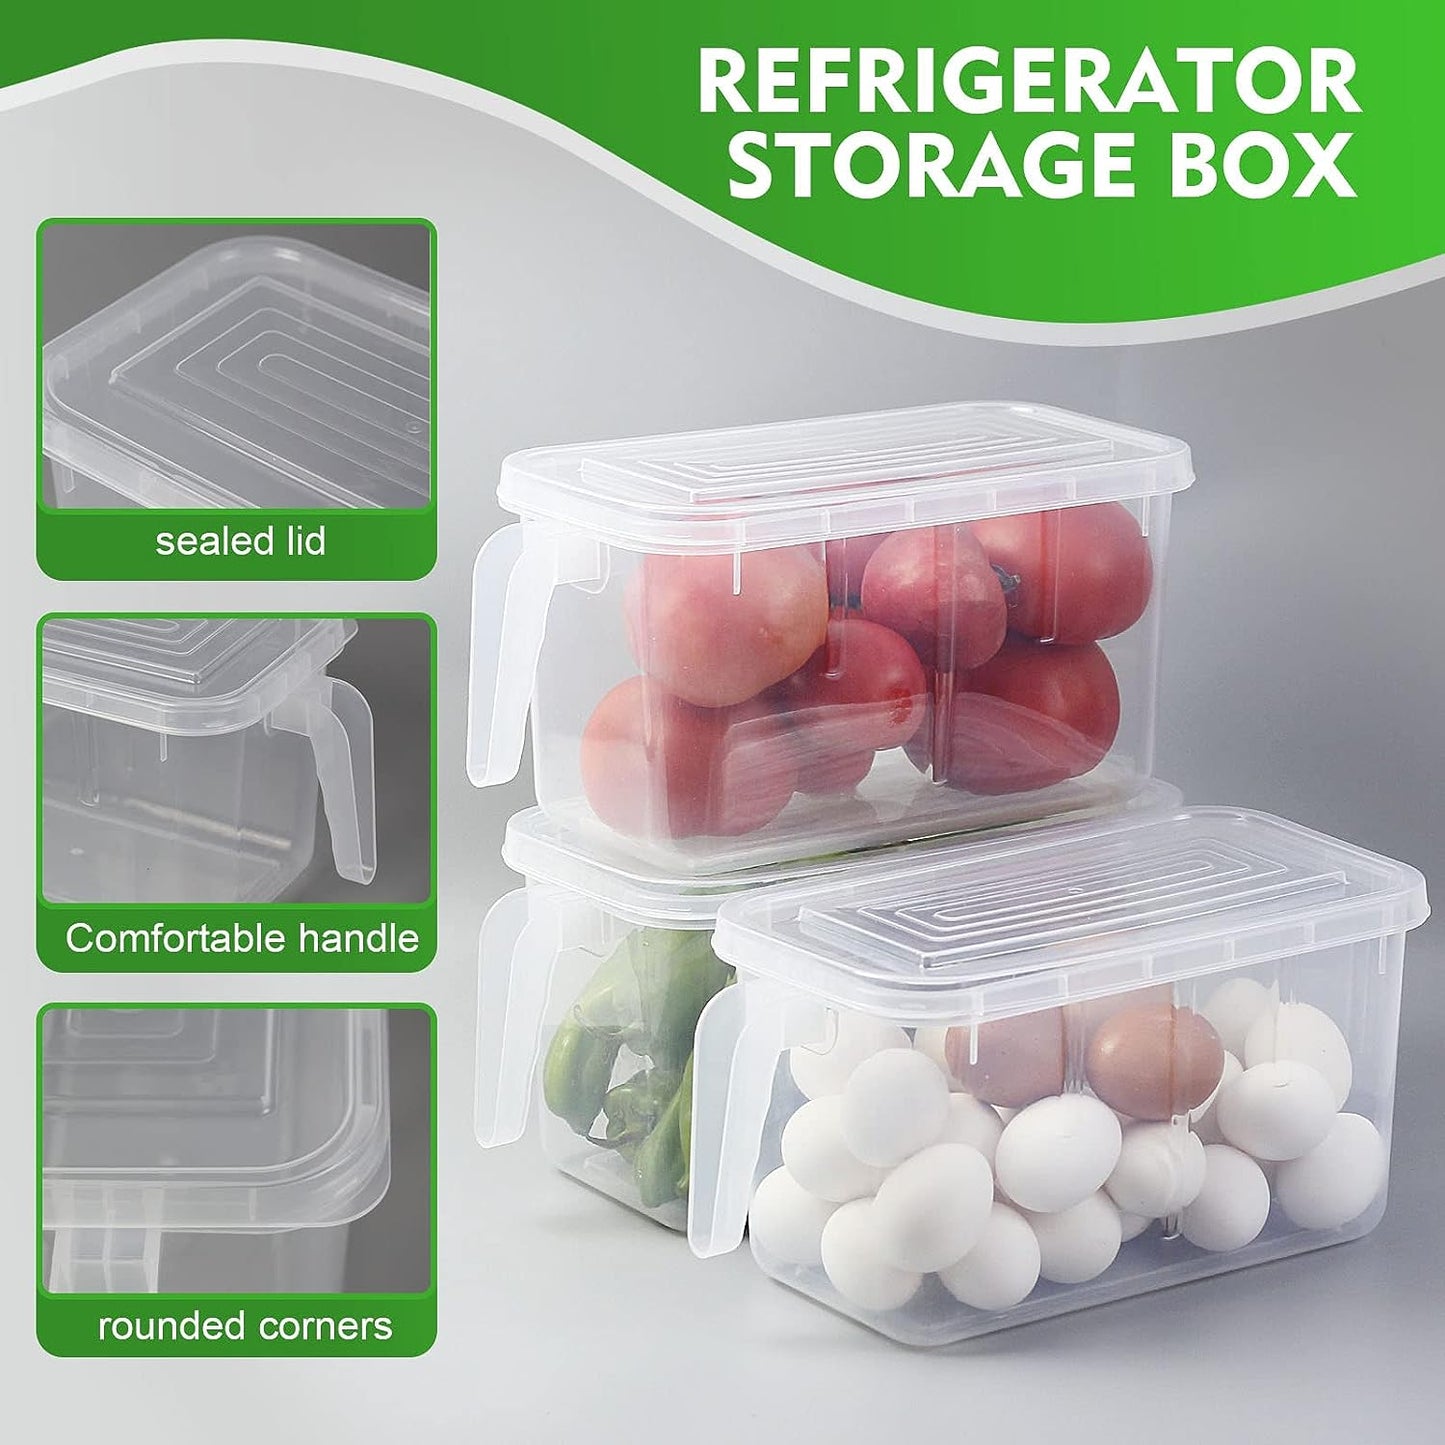 Food Storage Boxes With Lids Freezer Safe Volwco 3 Pcs 4.7L Large Plastic Kitchen Refrigerator Stackable Food Fruit Storage Containers With Handle